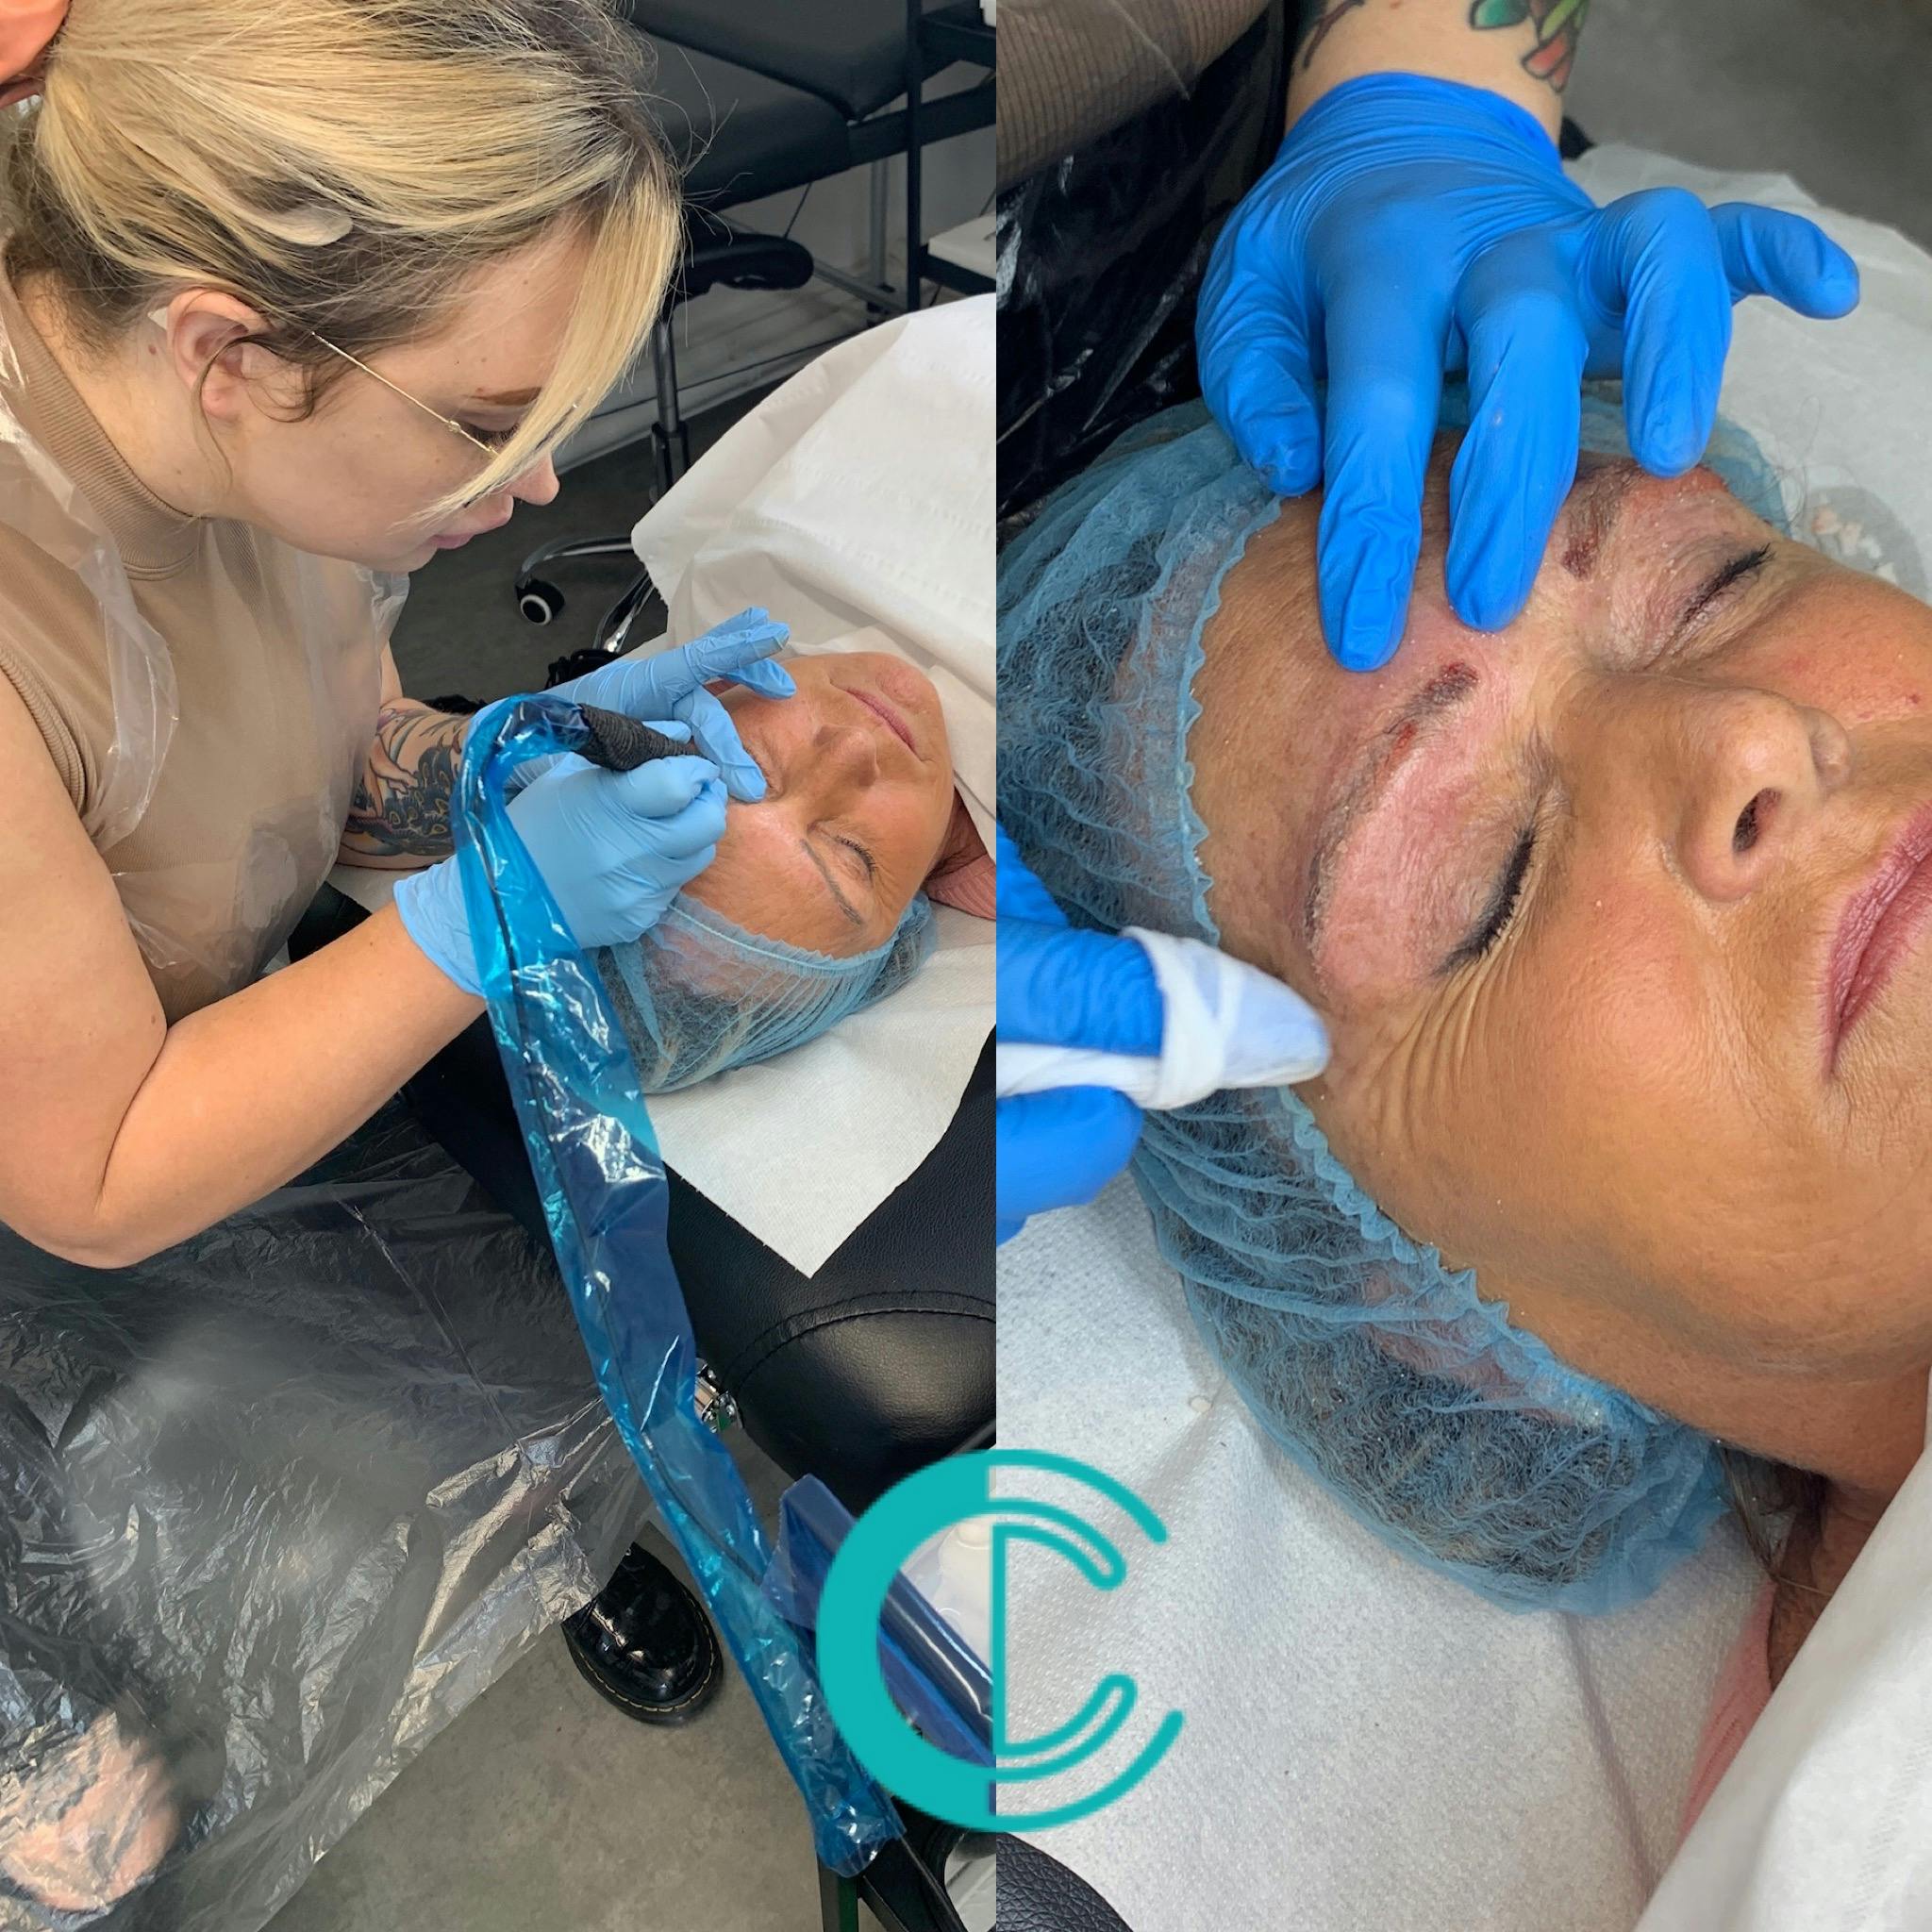 Permanent Makeup Removal Training At The Cosmetic College